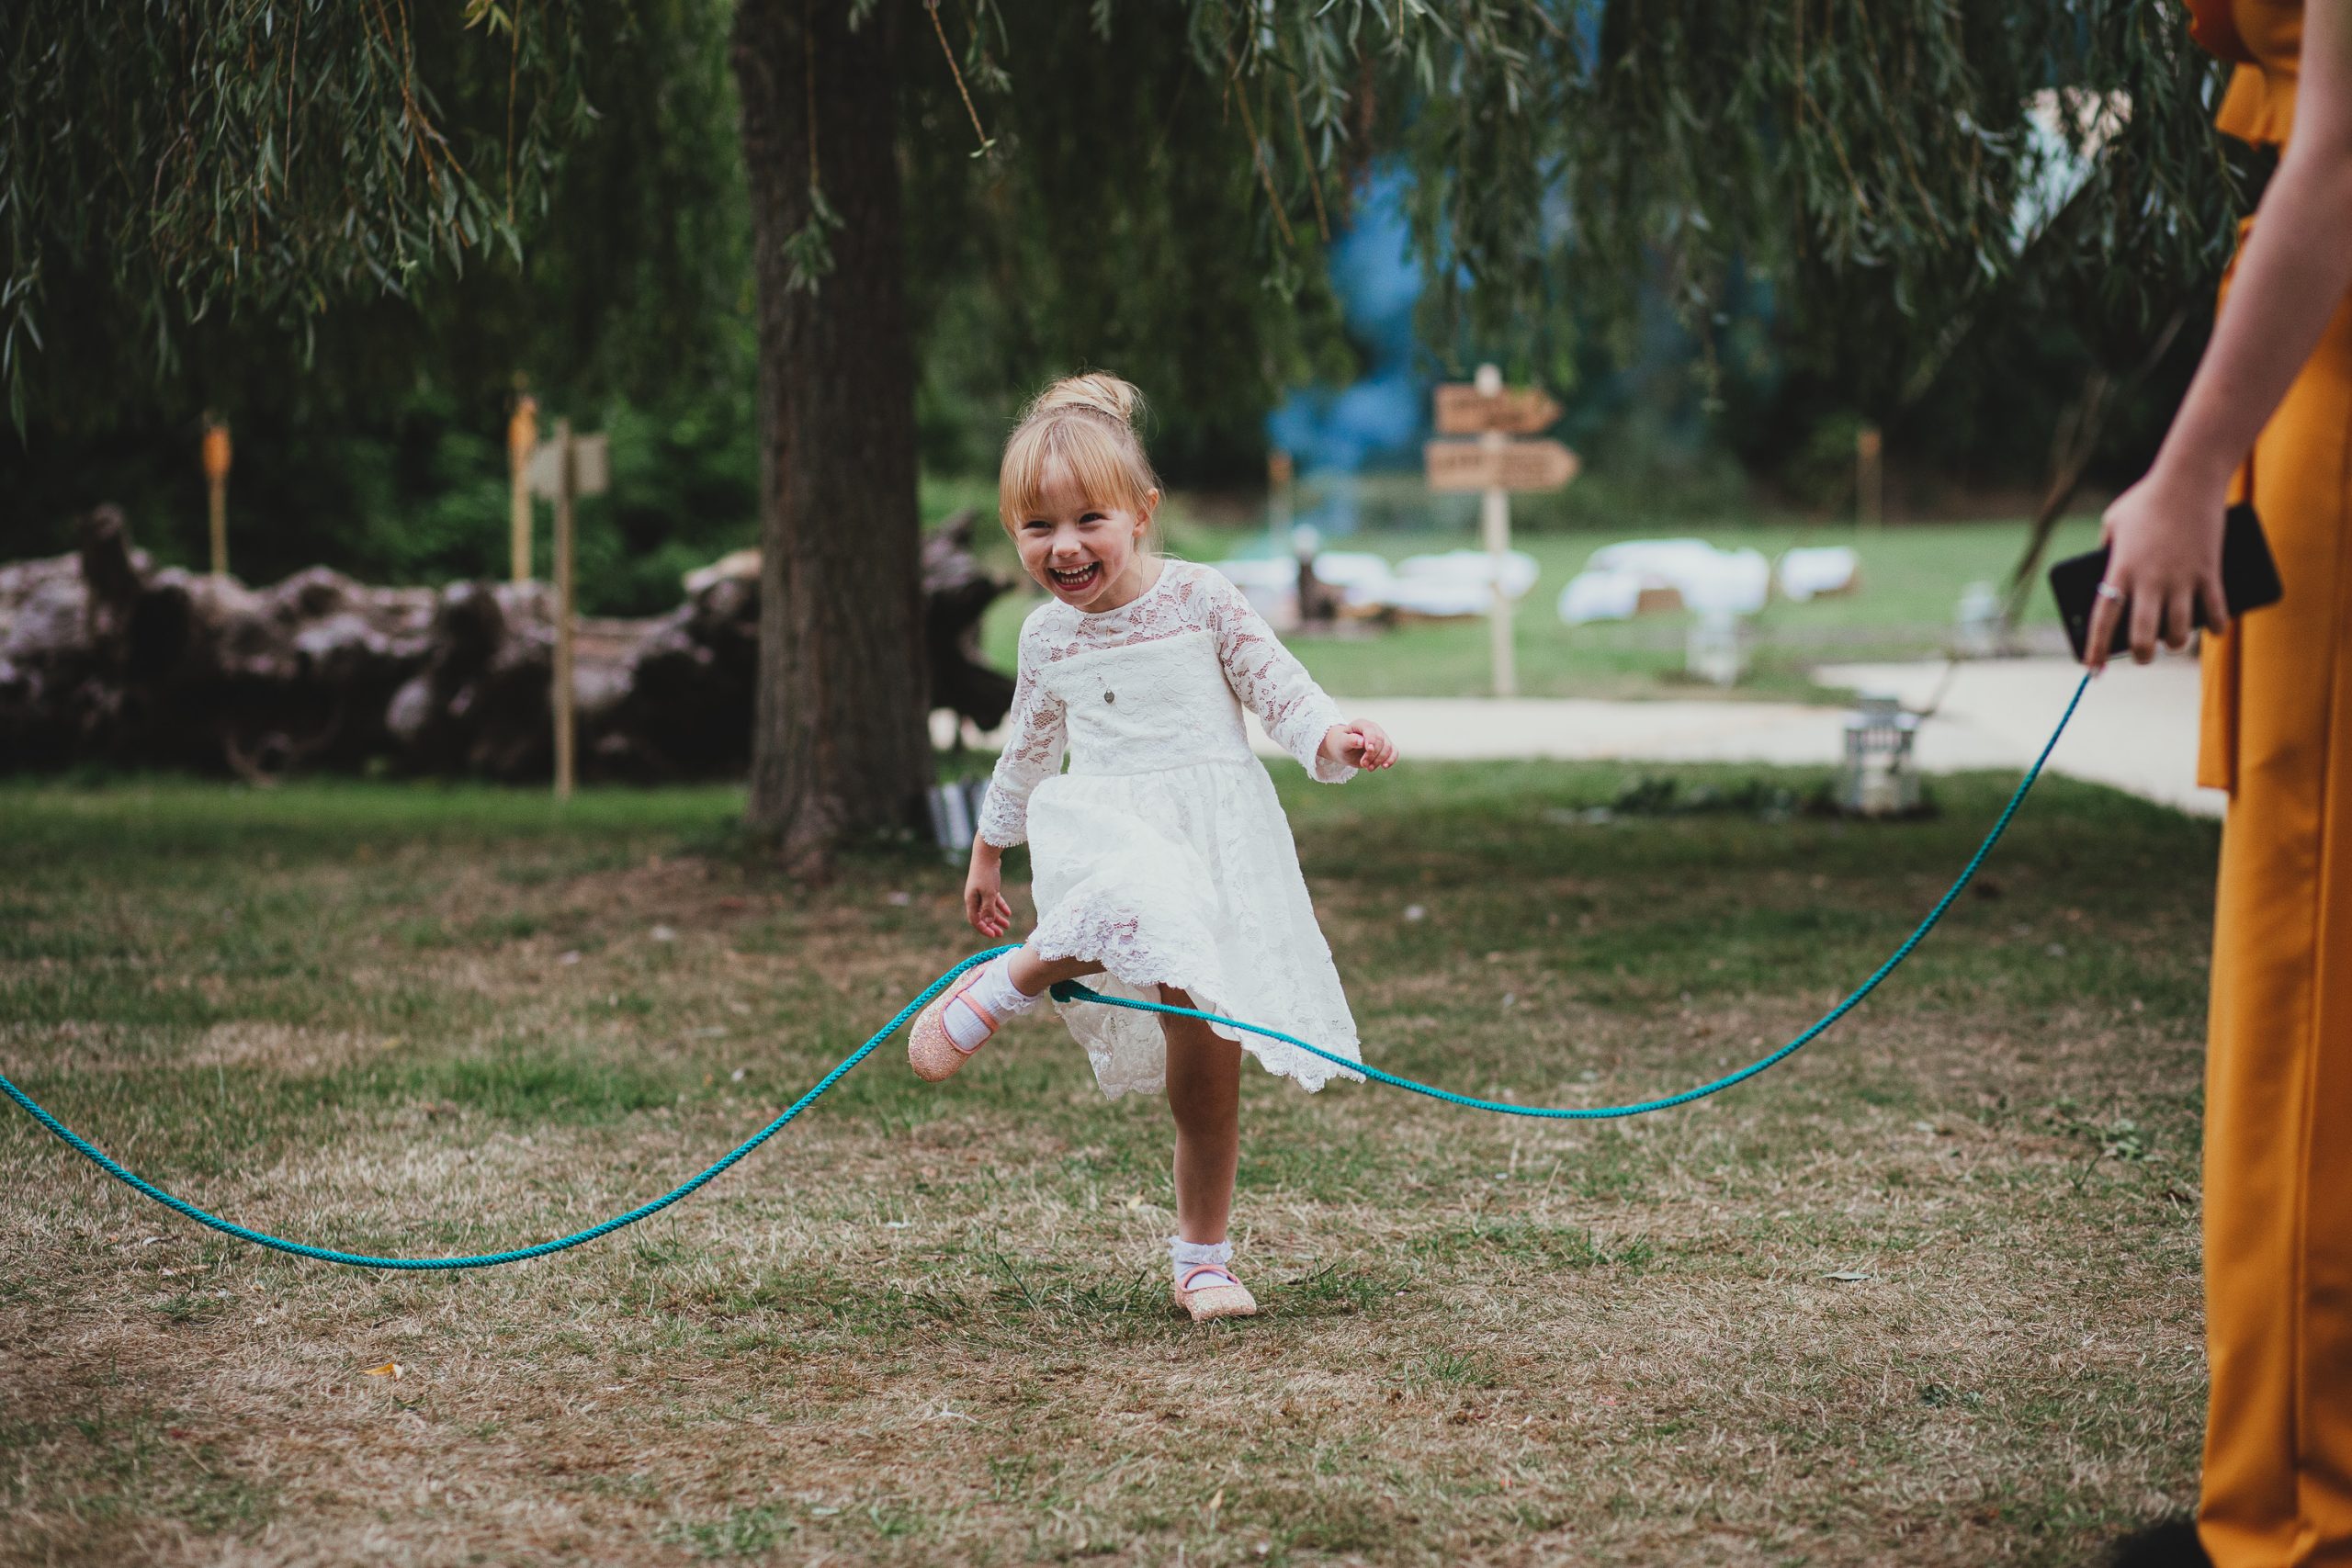 girl playing with outdoor wedding lawn games